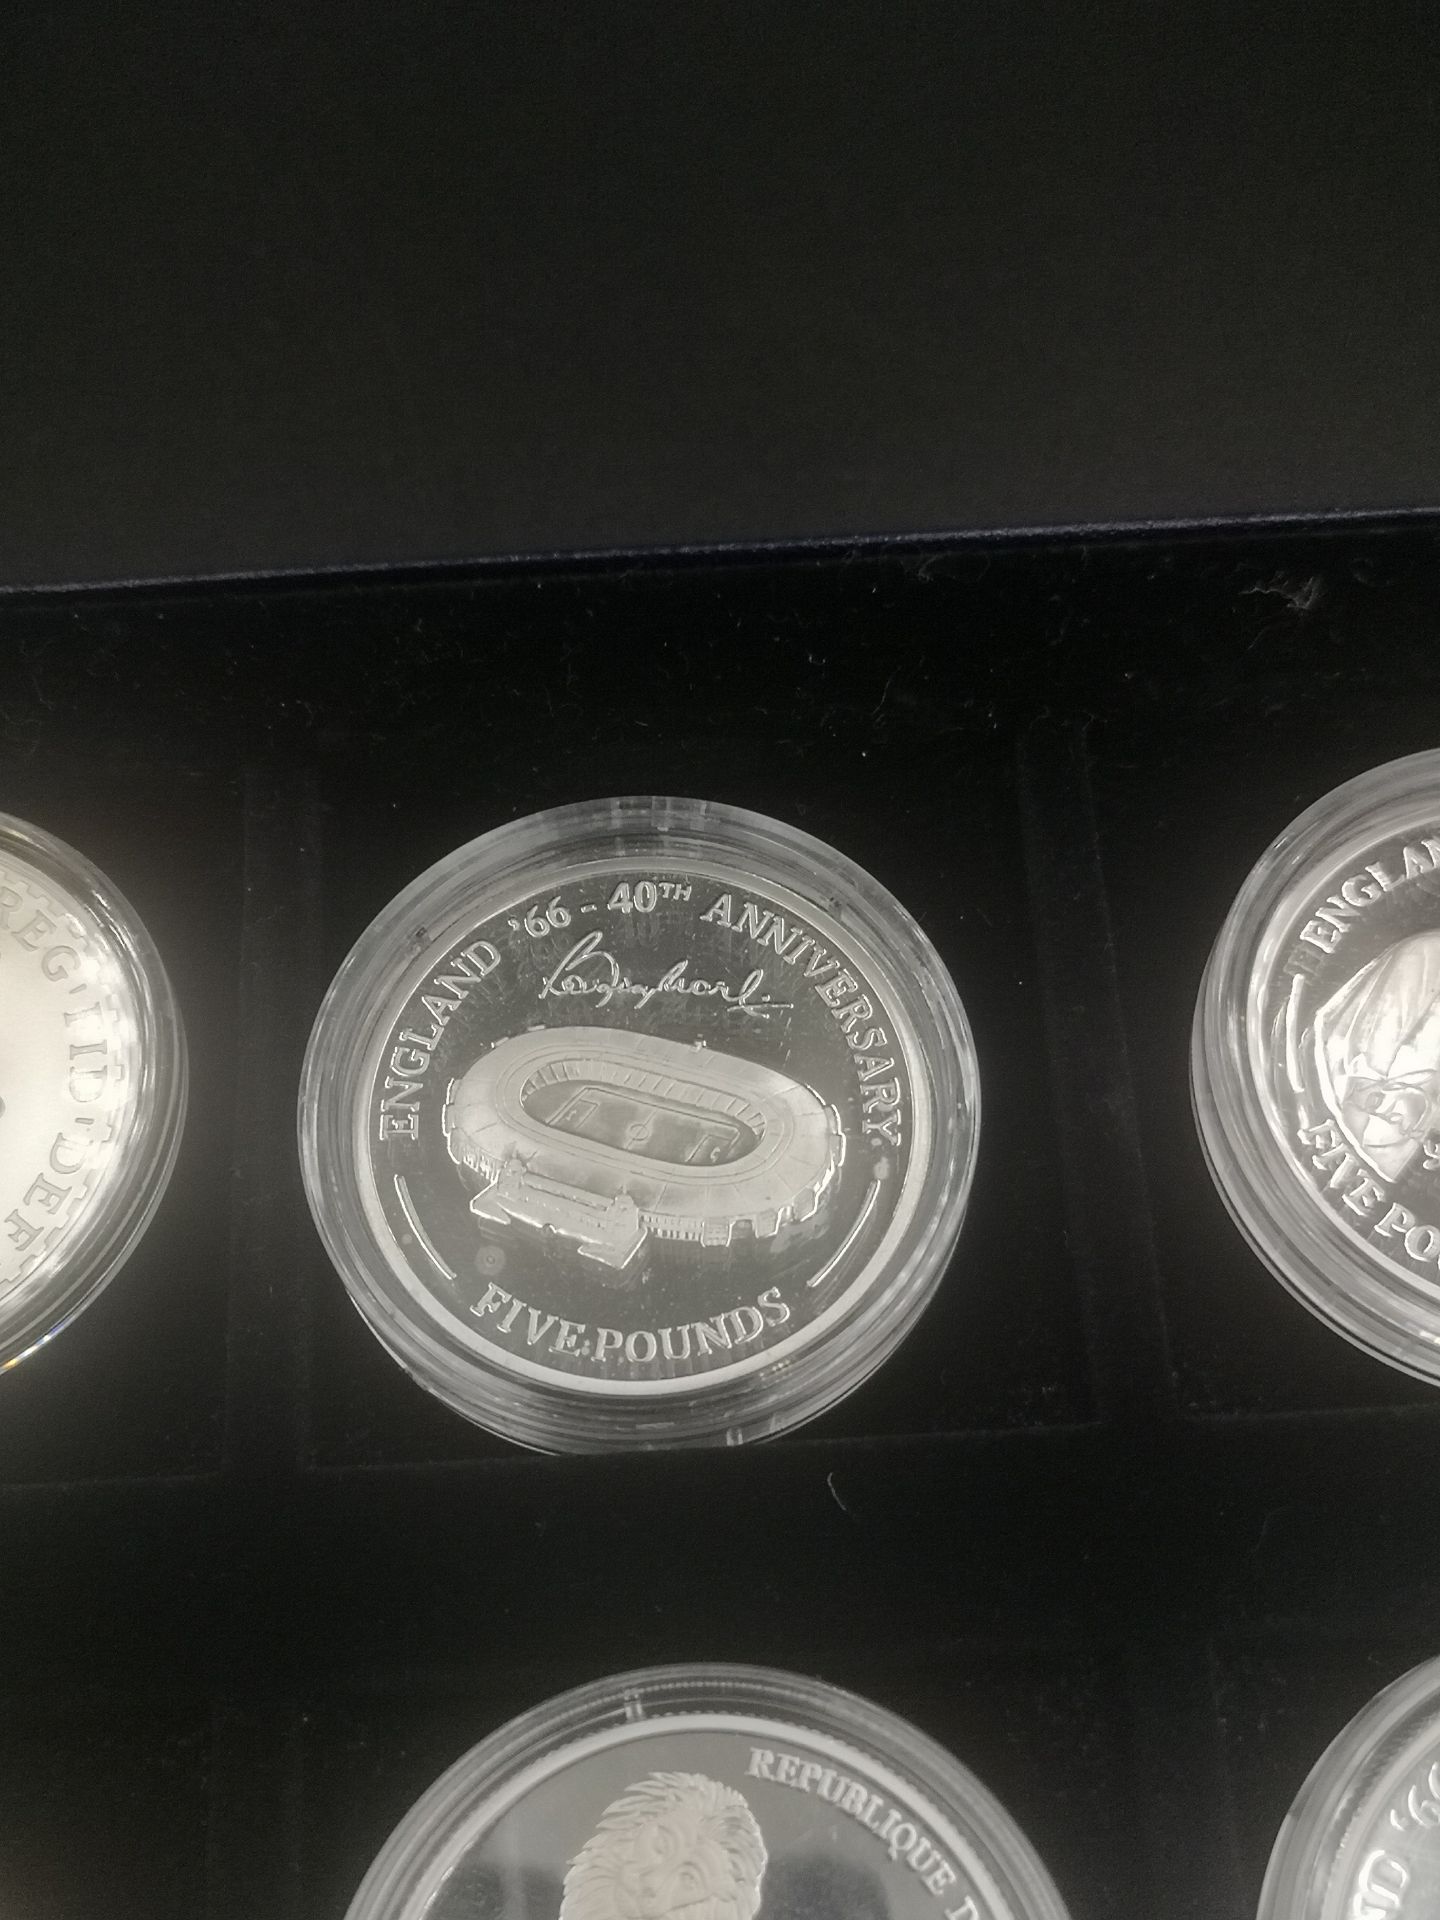 Siz silver proof £5 coins together with two silver 10 franc coins - Image 6 of 9